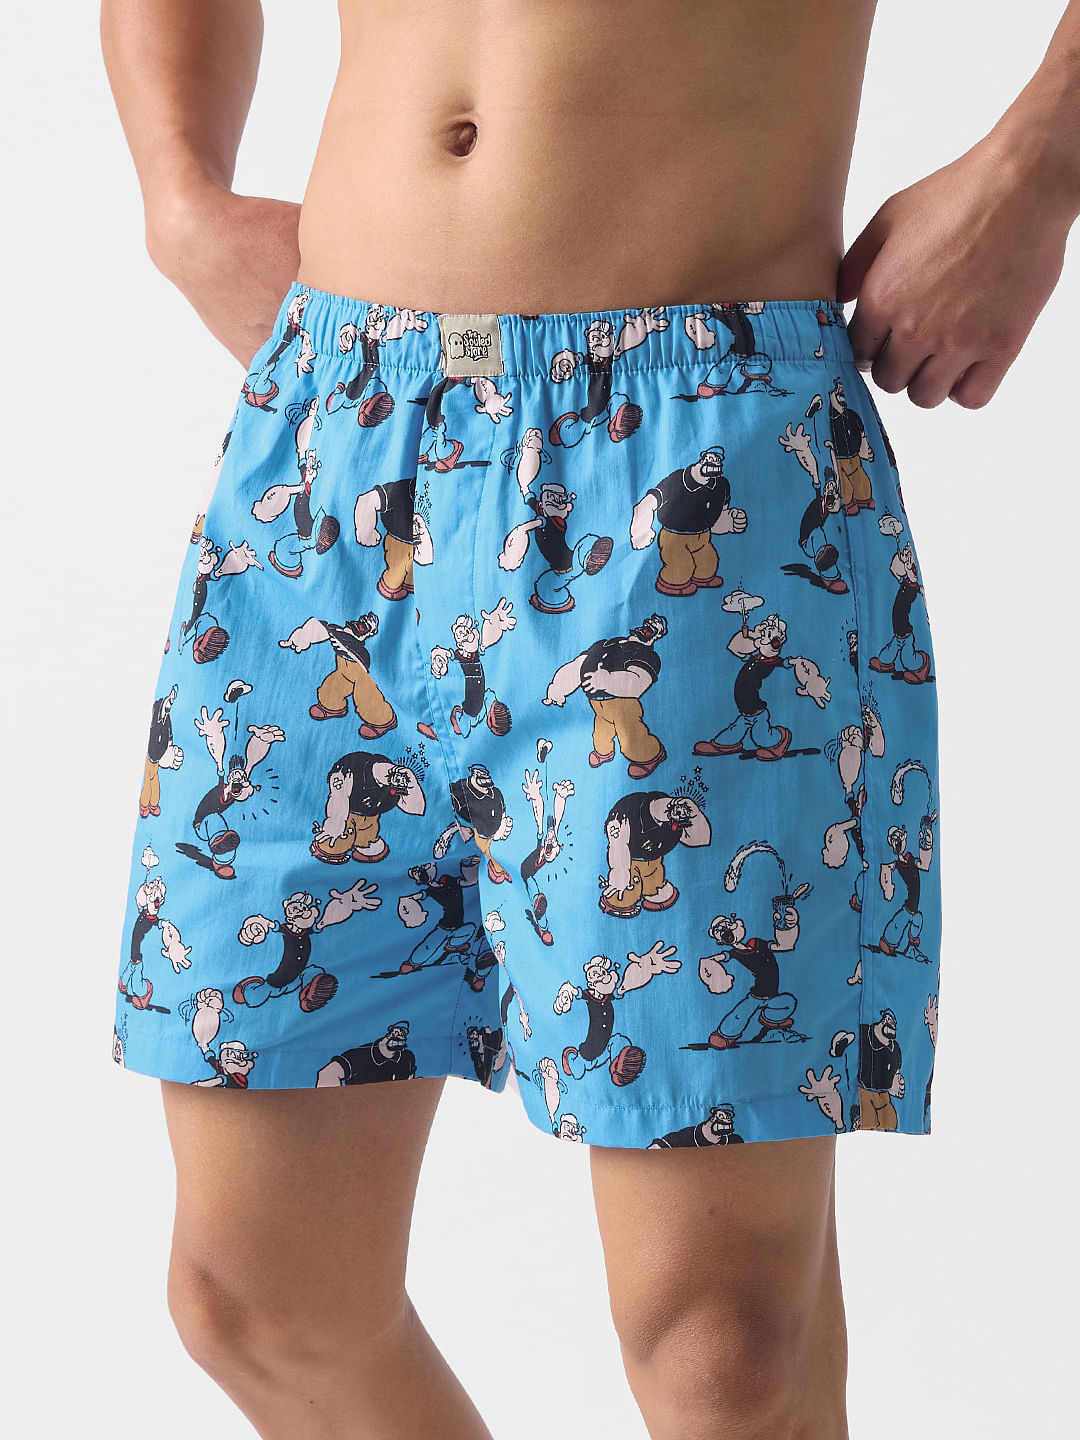 Buy Official Popeye: Pattern Boxer Shorts Online